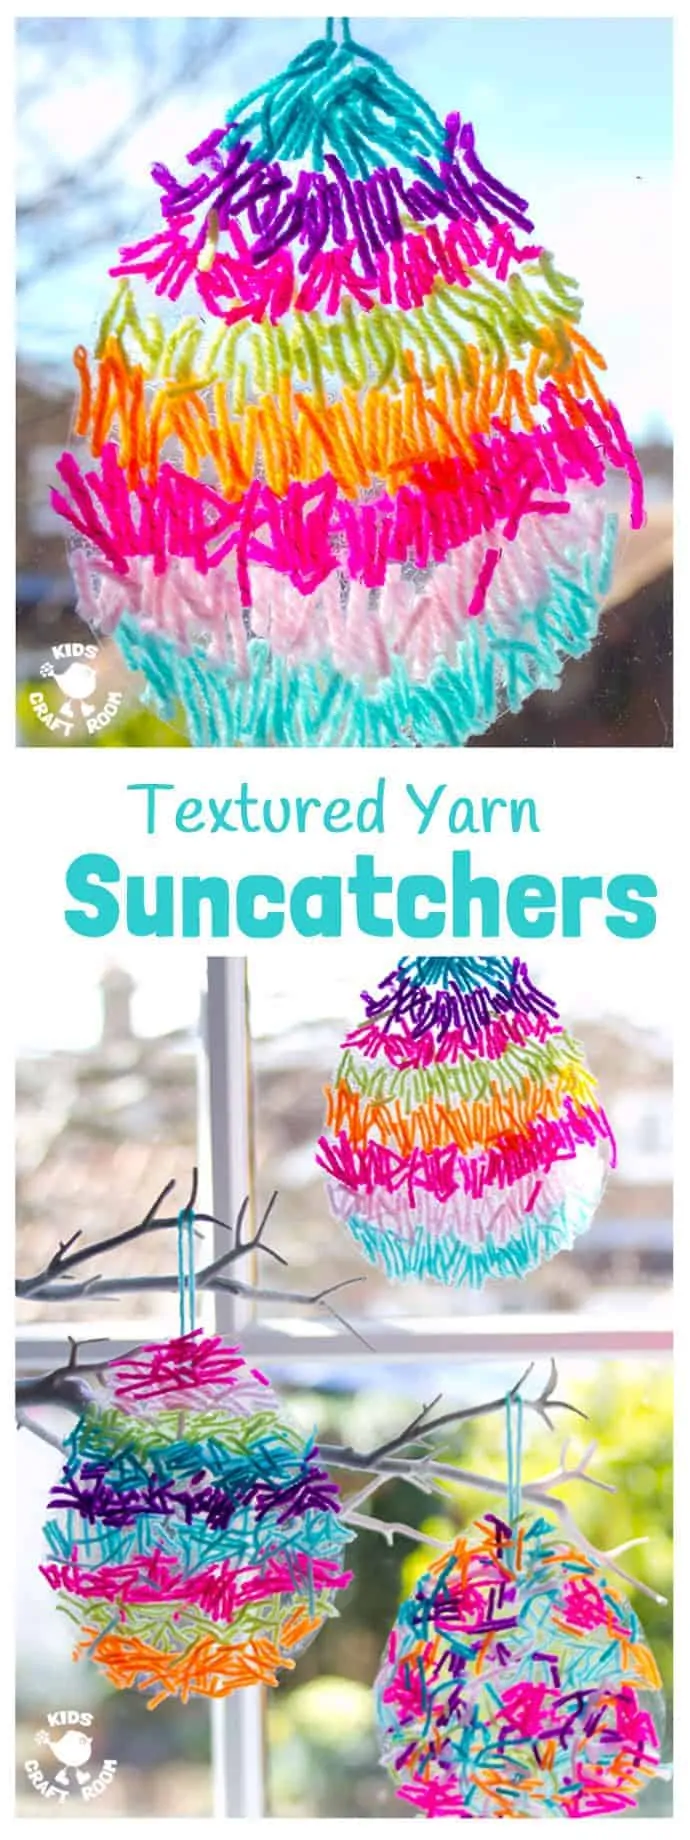 This textured yarn EASTER SUNCATCHER CRAFT is a gorgeous Easter craft or Spring craft for kids of all ages. A simple yarn craft made from scraps, these homemade Easter Egg Suncatchers look stunning in windows or hanging on an Easter tree. These are DIY Easter decorations you'll want to display year after year. #easter #eastercrafts #eastereggs #suncatchers #kidscrafts #craftsforkids #kidscraftroom #yarncrafts #suncatcher #eggcrafts #springcrafts